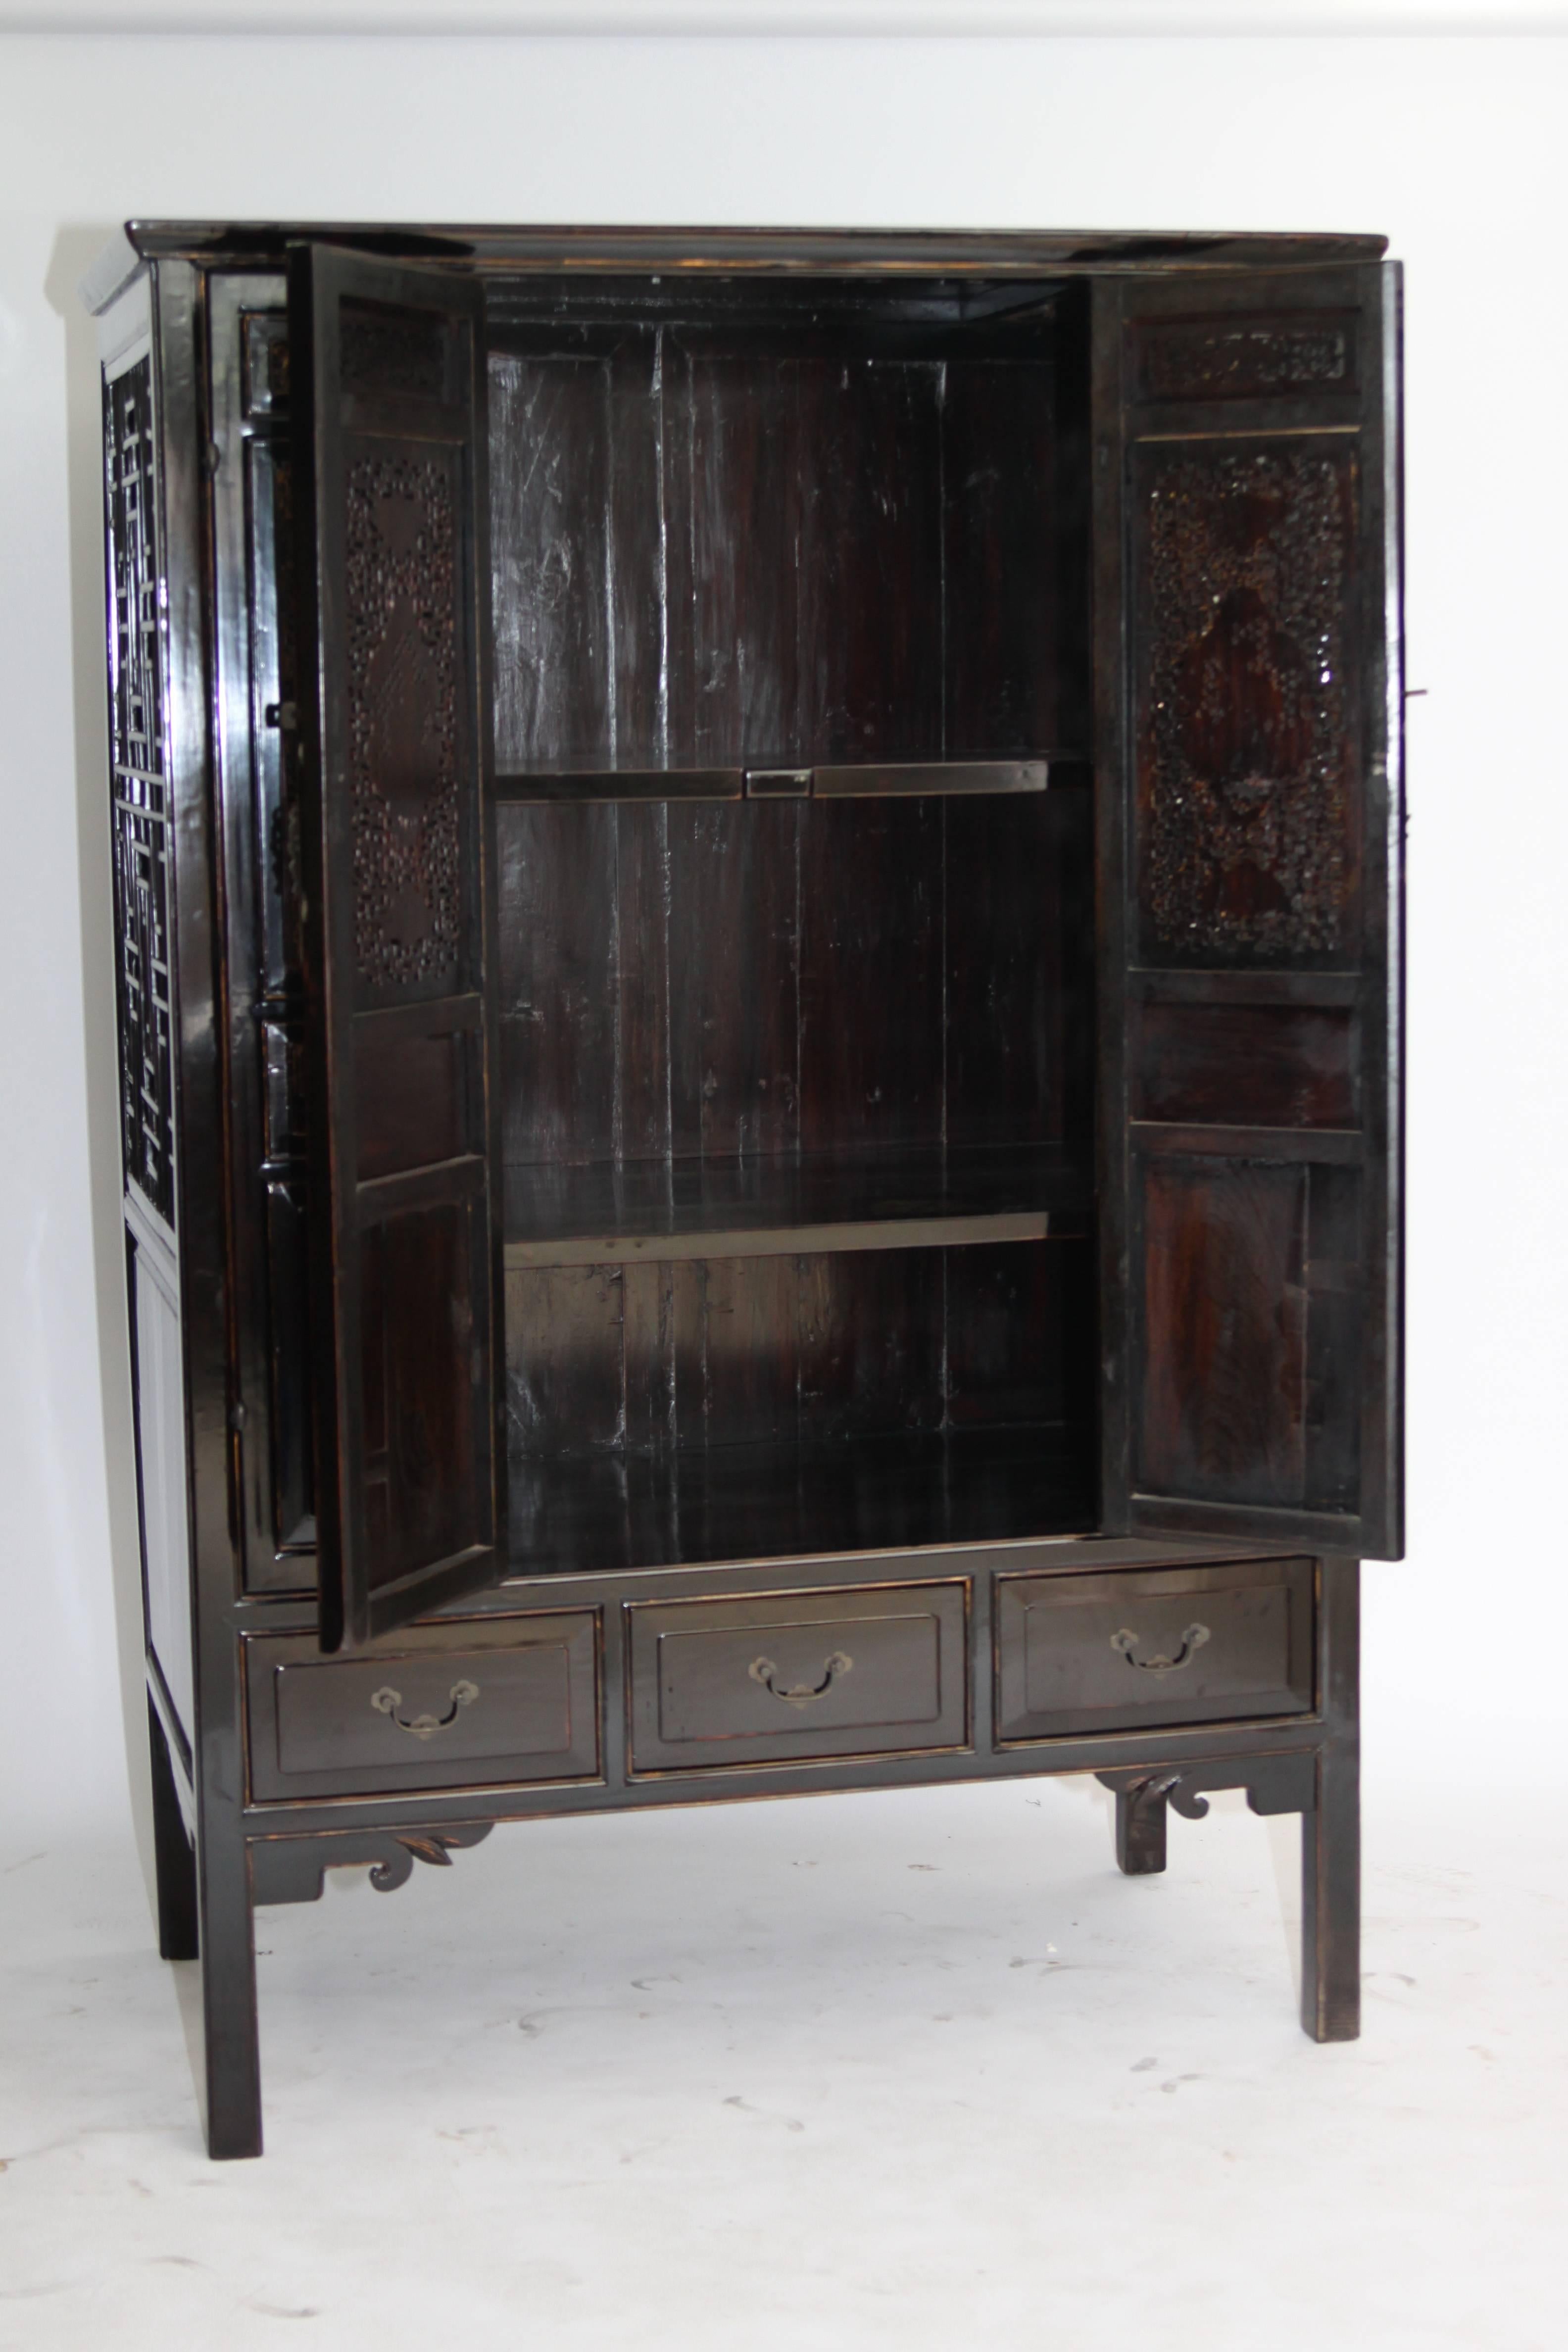 Antique Chinoiserie Zhejiang Lacquer Cabinet, Gilt Carved & Lattice/Fret Panels 1